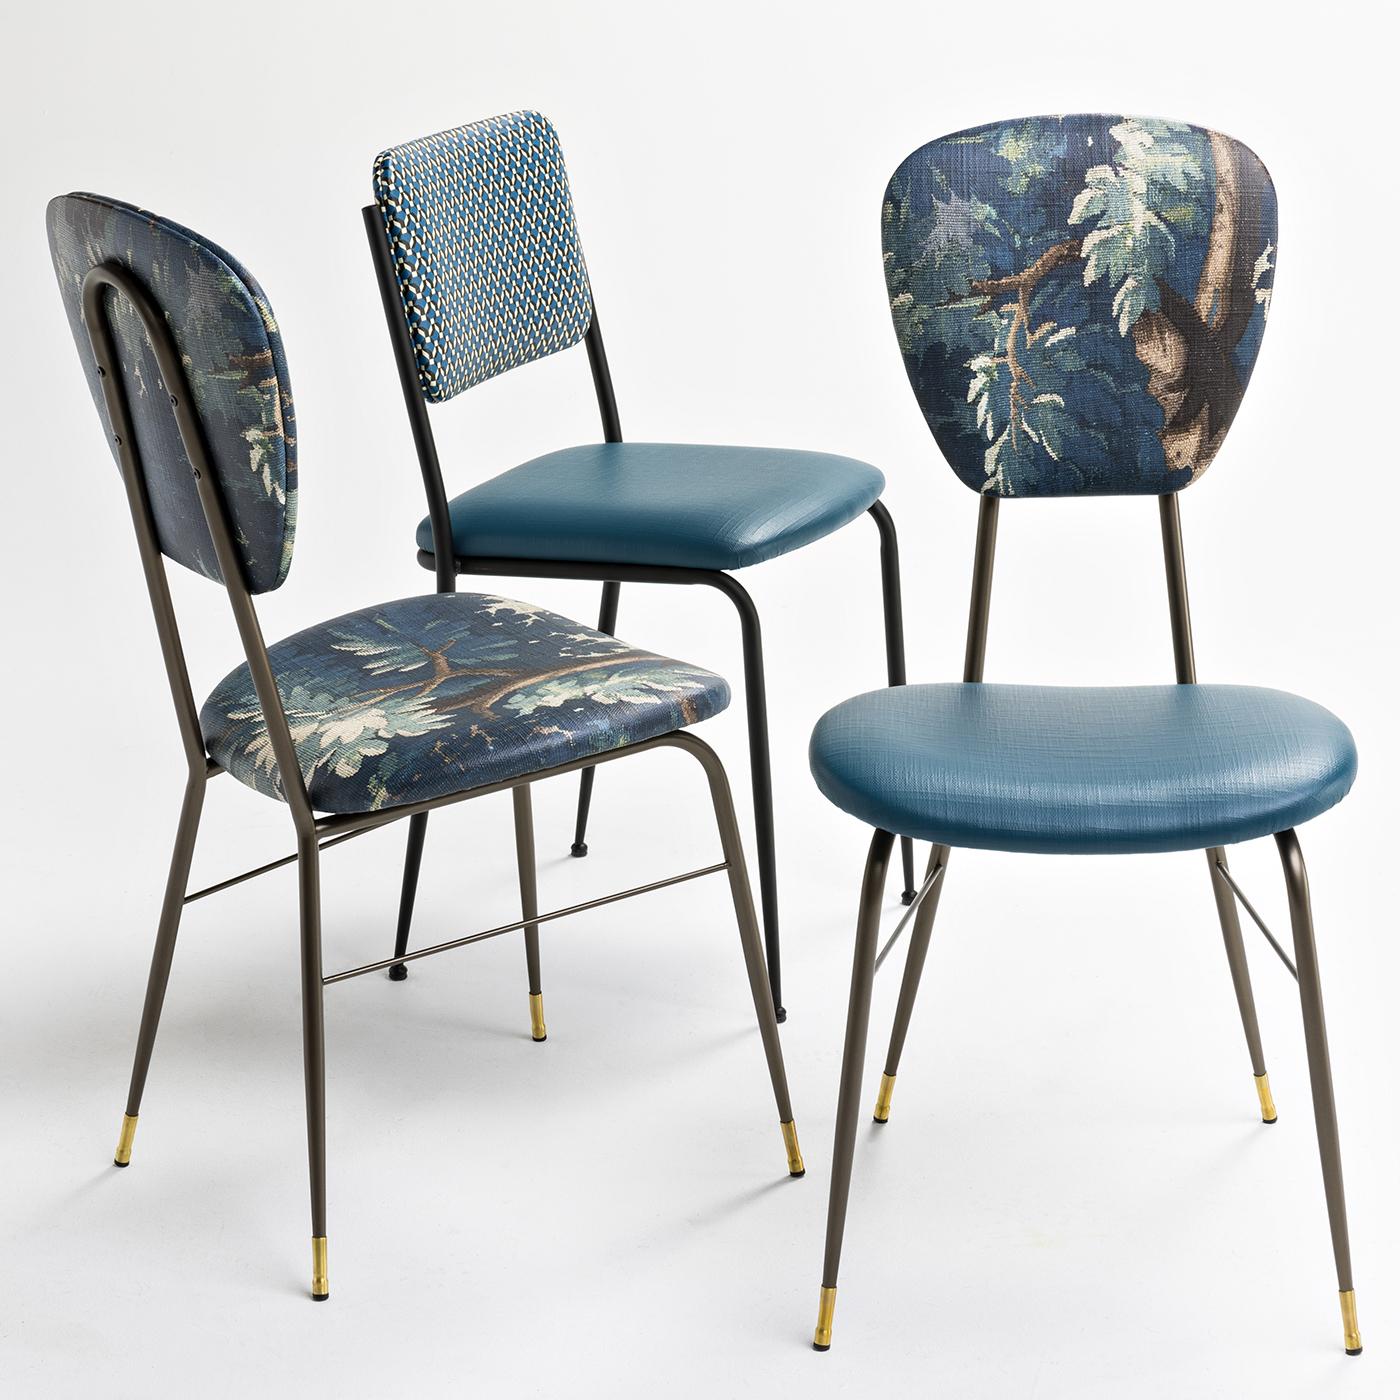 A beautiful chair for around a dining table, perhaps with a bit of a vintage feel. The metal frame and legs have a brushed bronze finish, while decorative brass chair guides adorn the legs. The seat is upholstered in an ocean-blue colored, fireproof